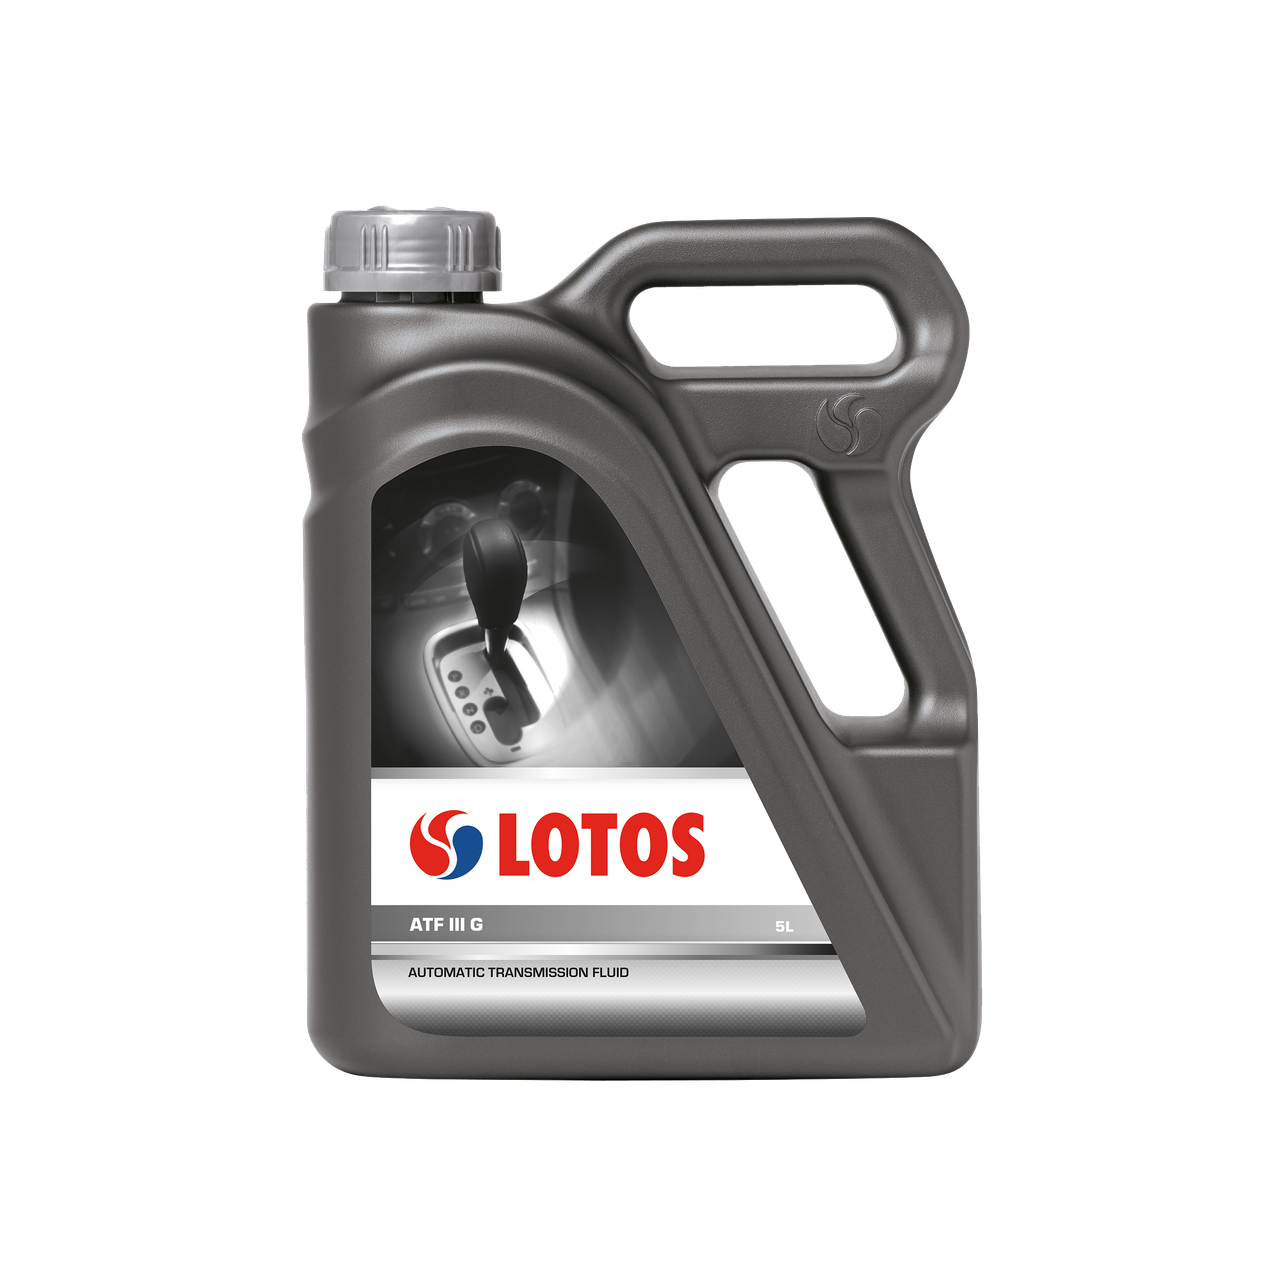 Lotos ATF wfk5087300h0. Масло Lotos ATF iid. Oil масло Lotos logo. Наклейки масел Lotos ATF 2d. Масло atf 5